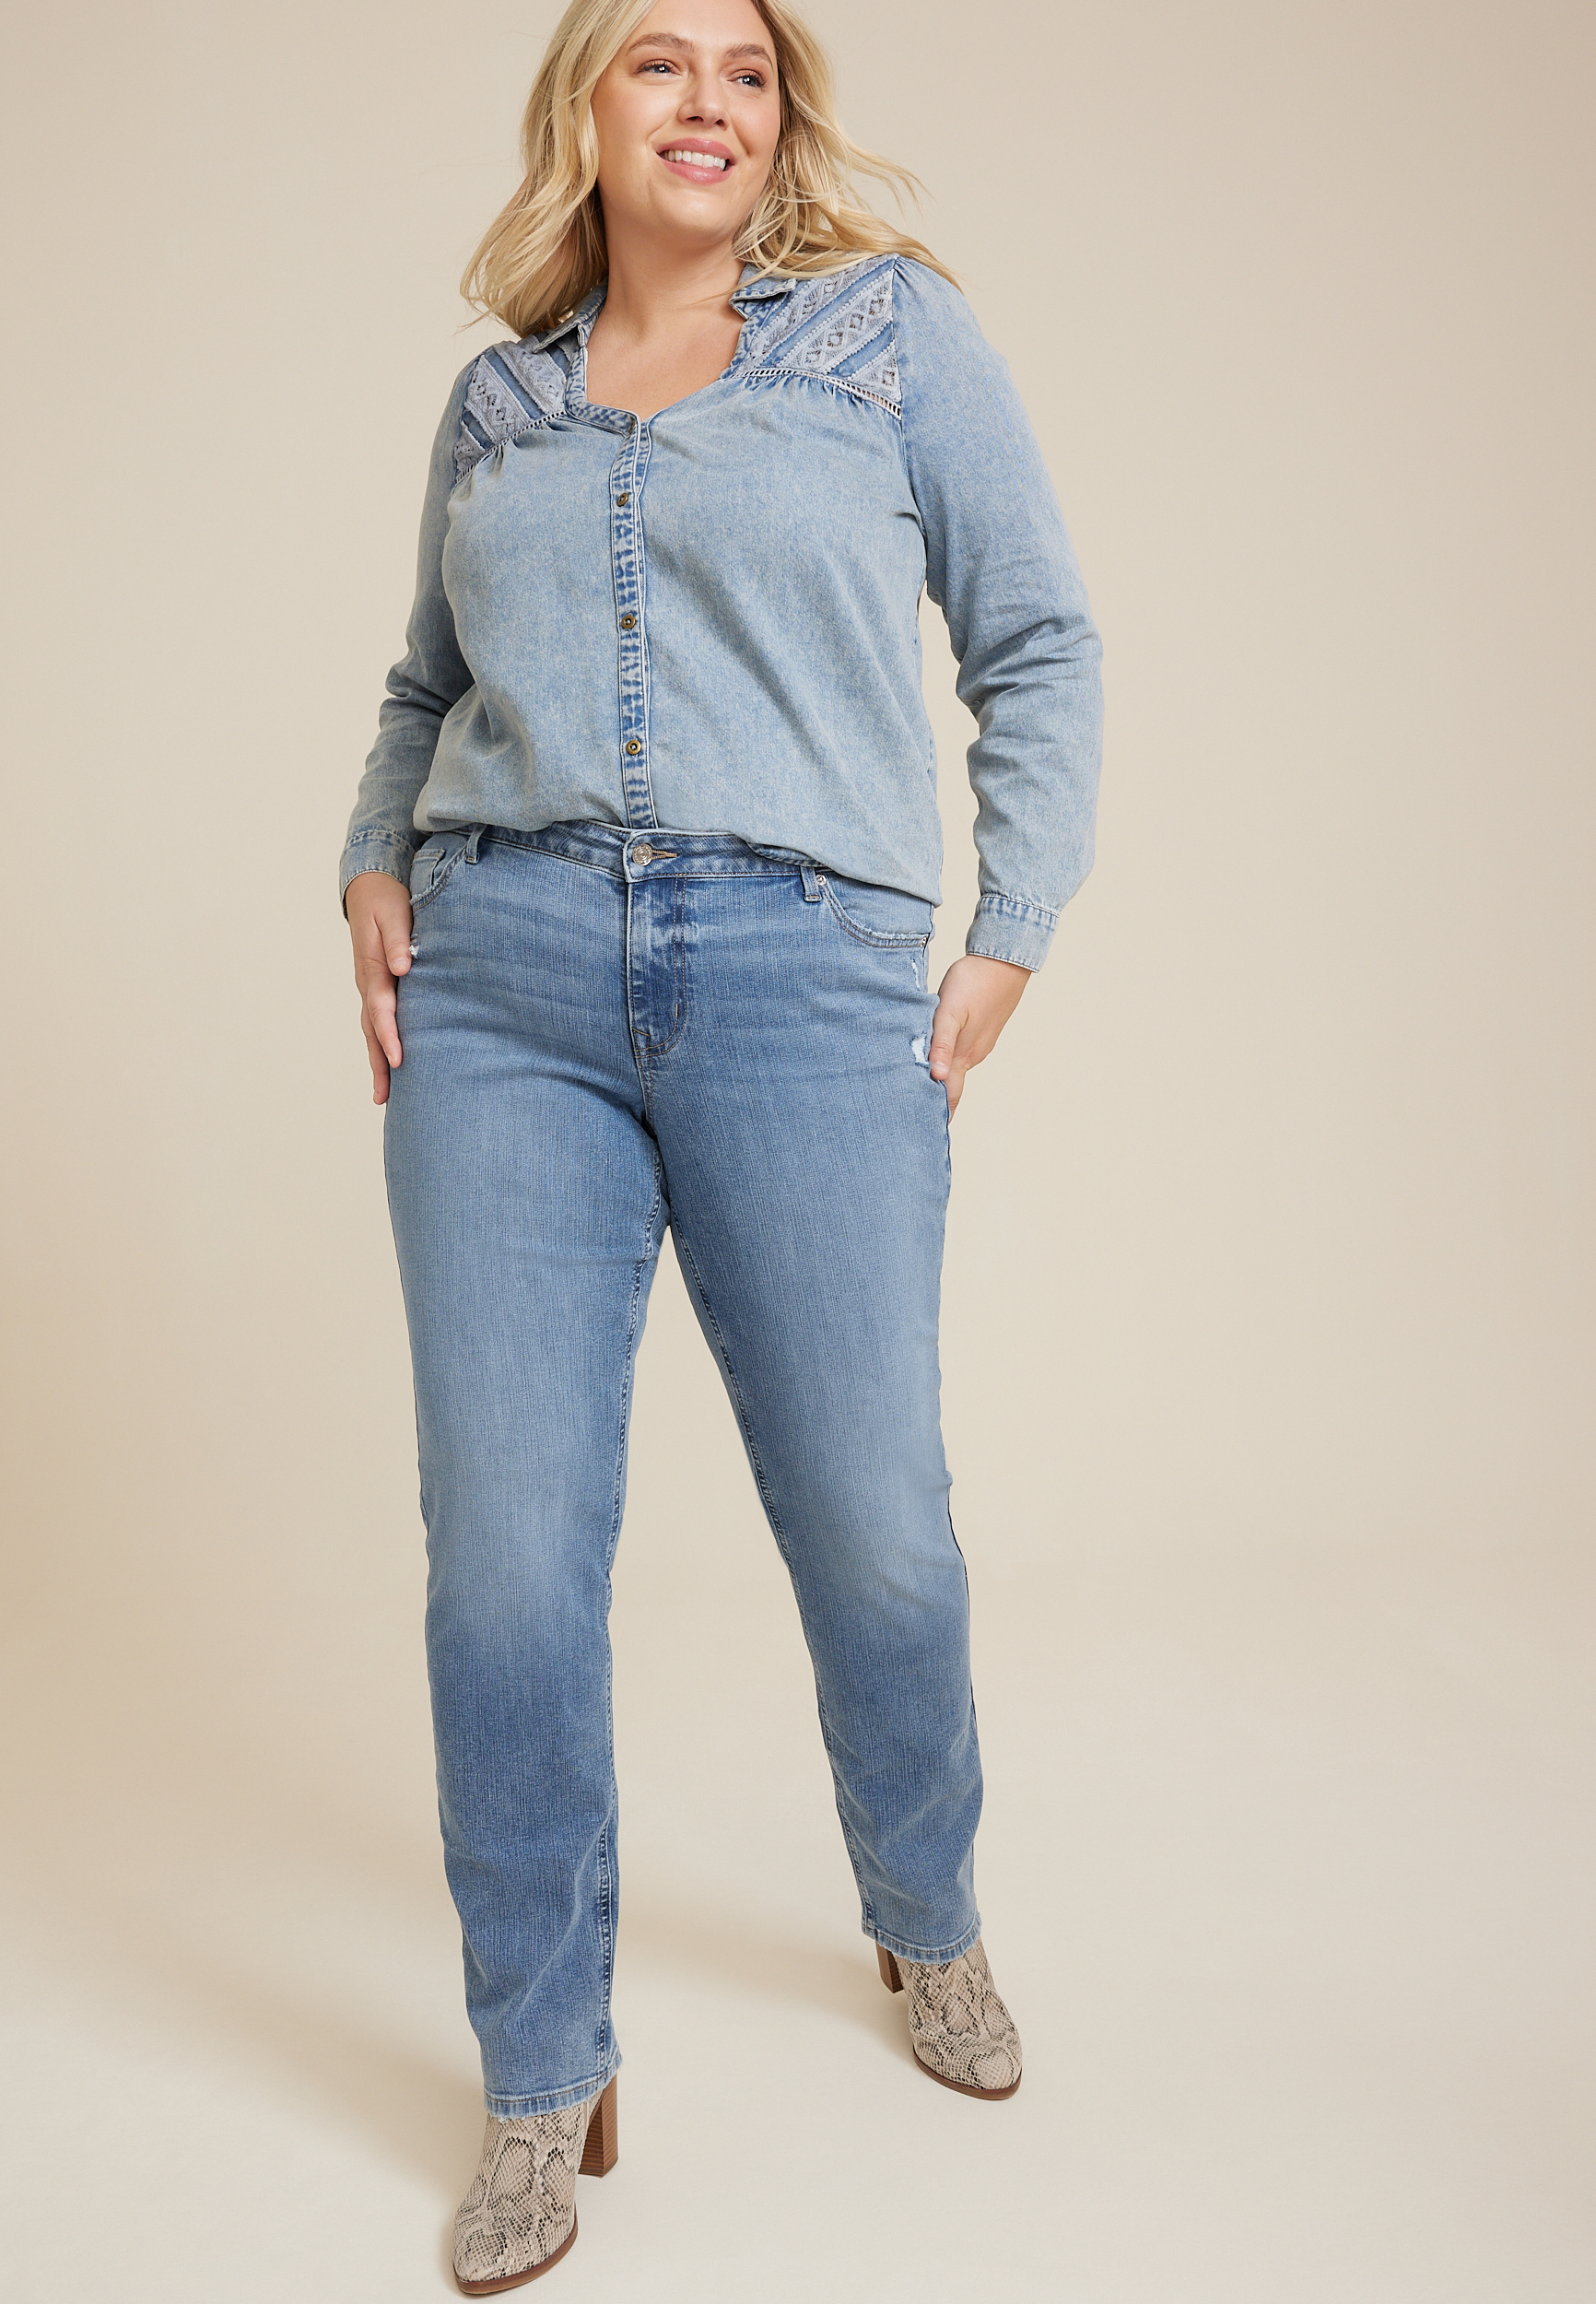 Plus Size m jeans by maurices™ Classic Mid Rise Straight Jean | maurices